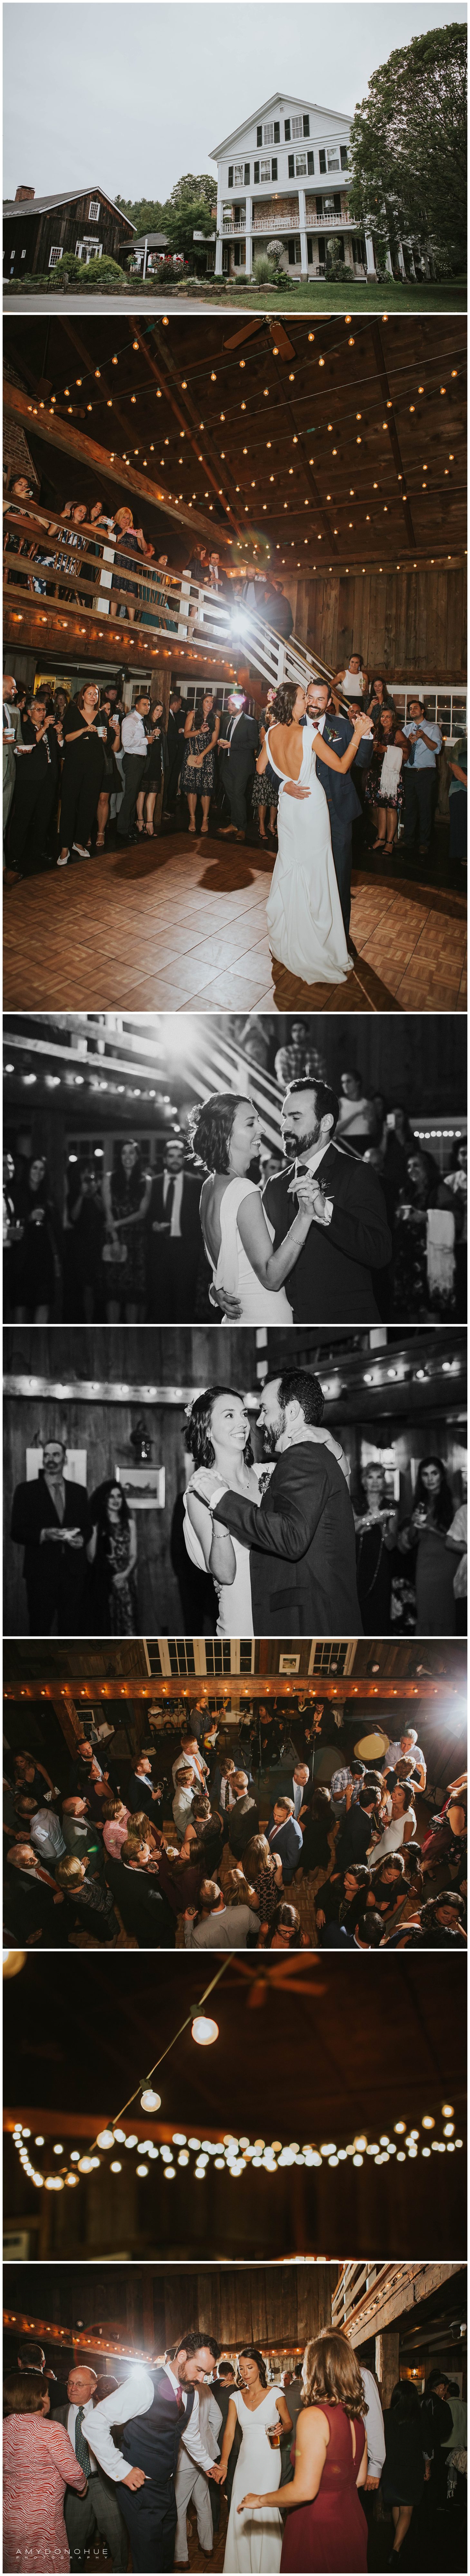 First Dance | Grafton, Vermont Wedding Photographer | © Amy Donohue Photography